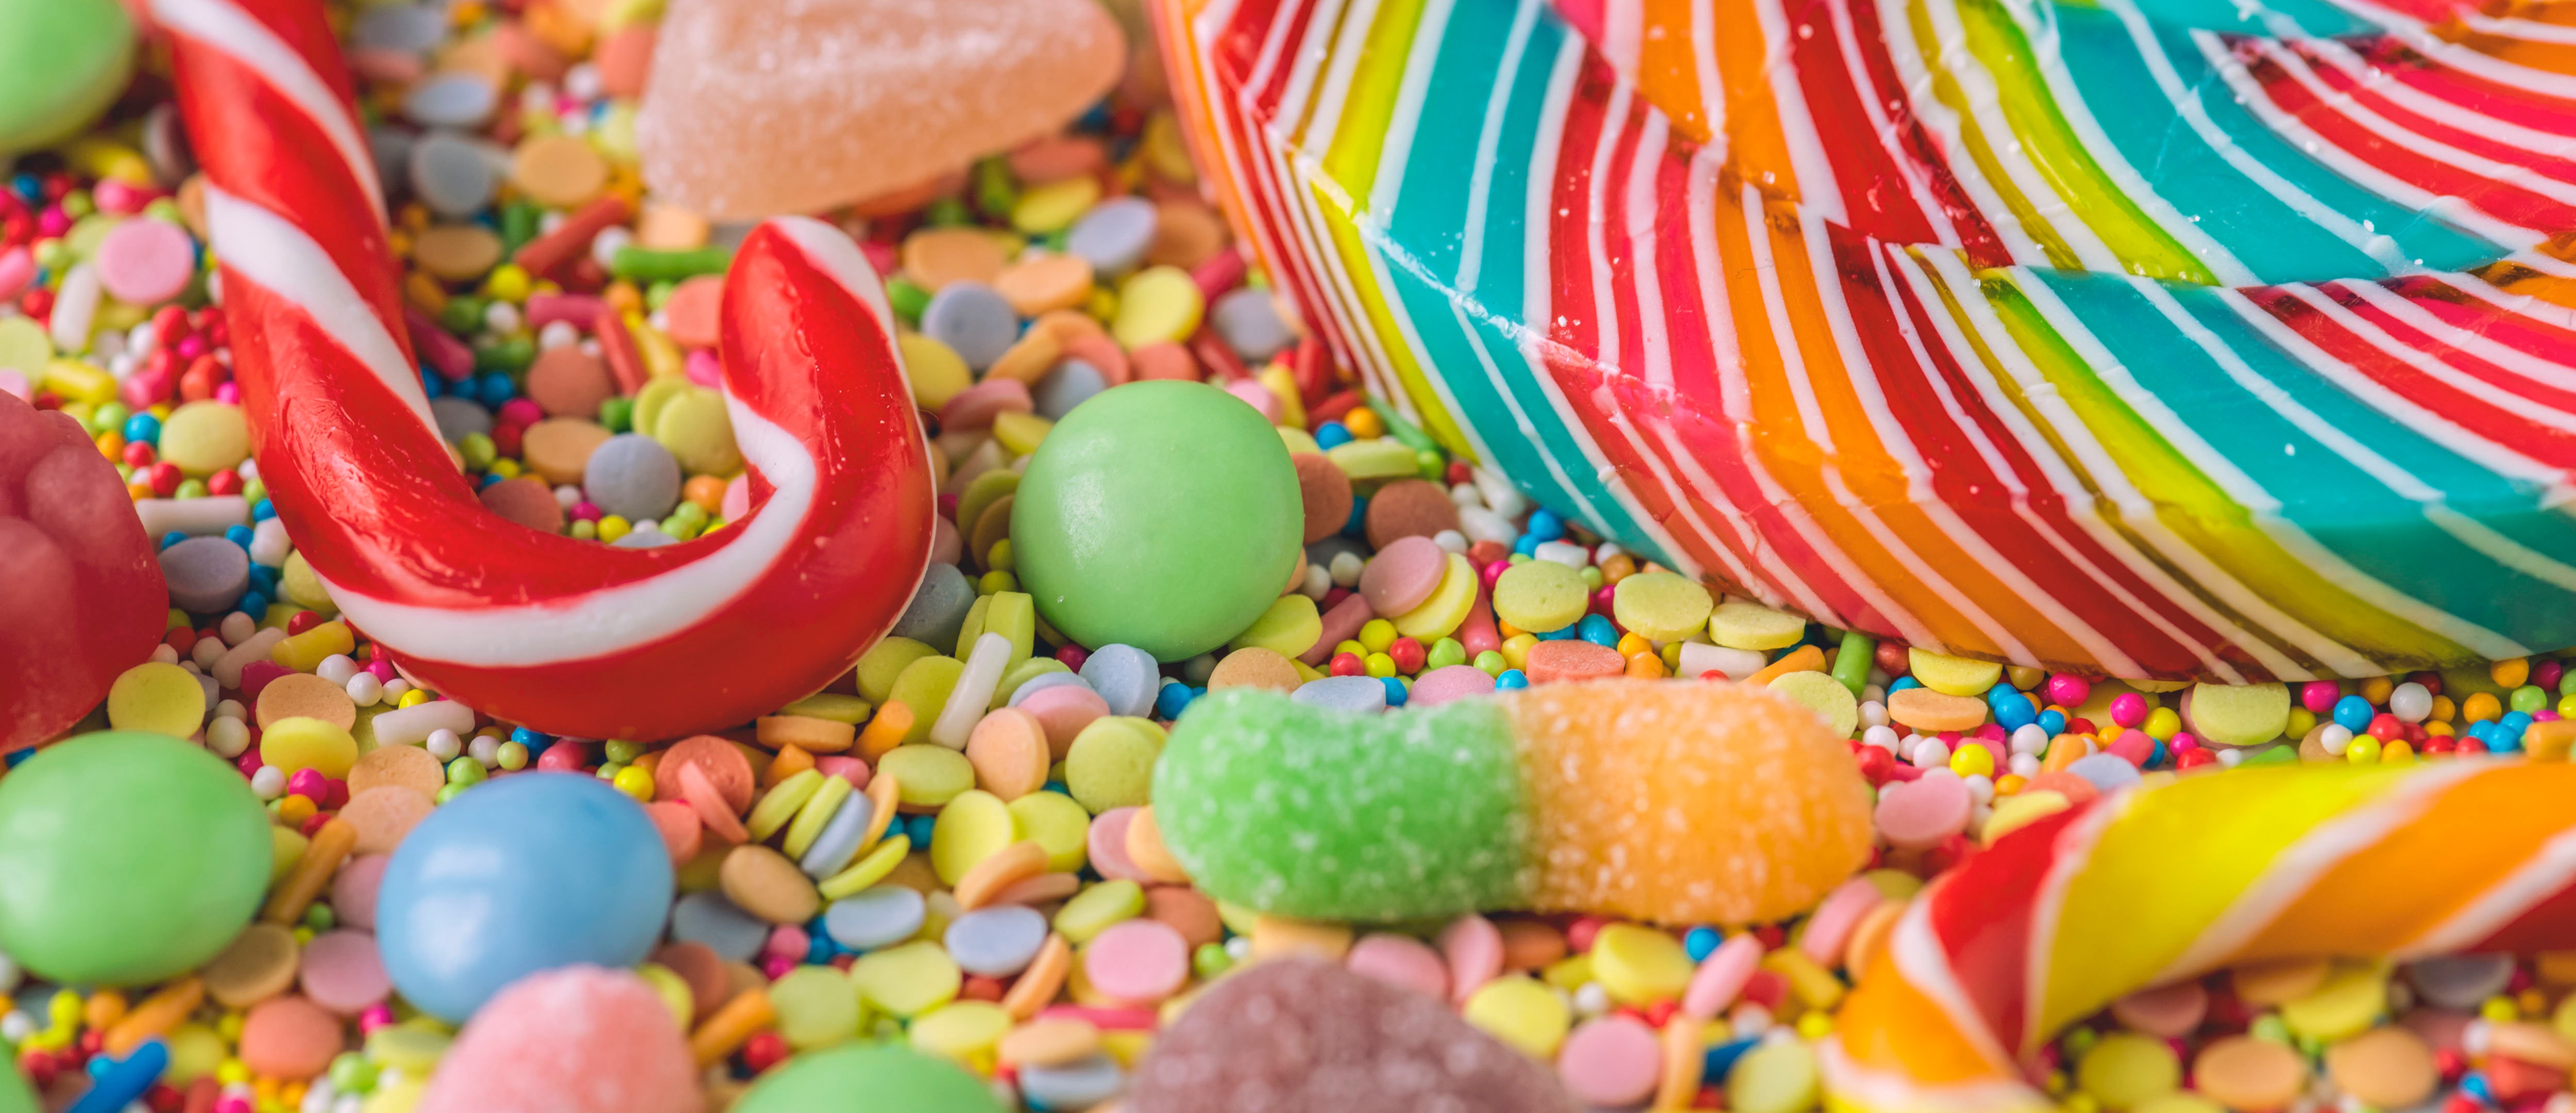 June is National Candy Month! How to be Smart about Sweets and Dental Health